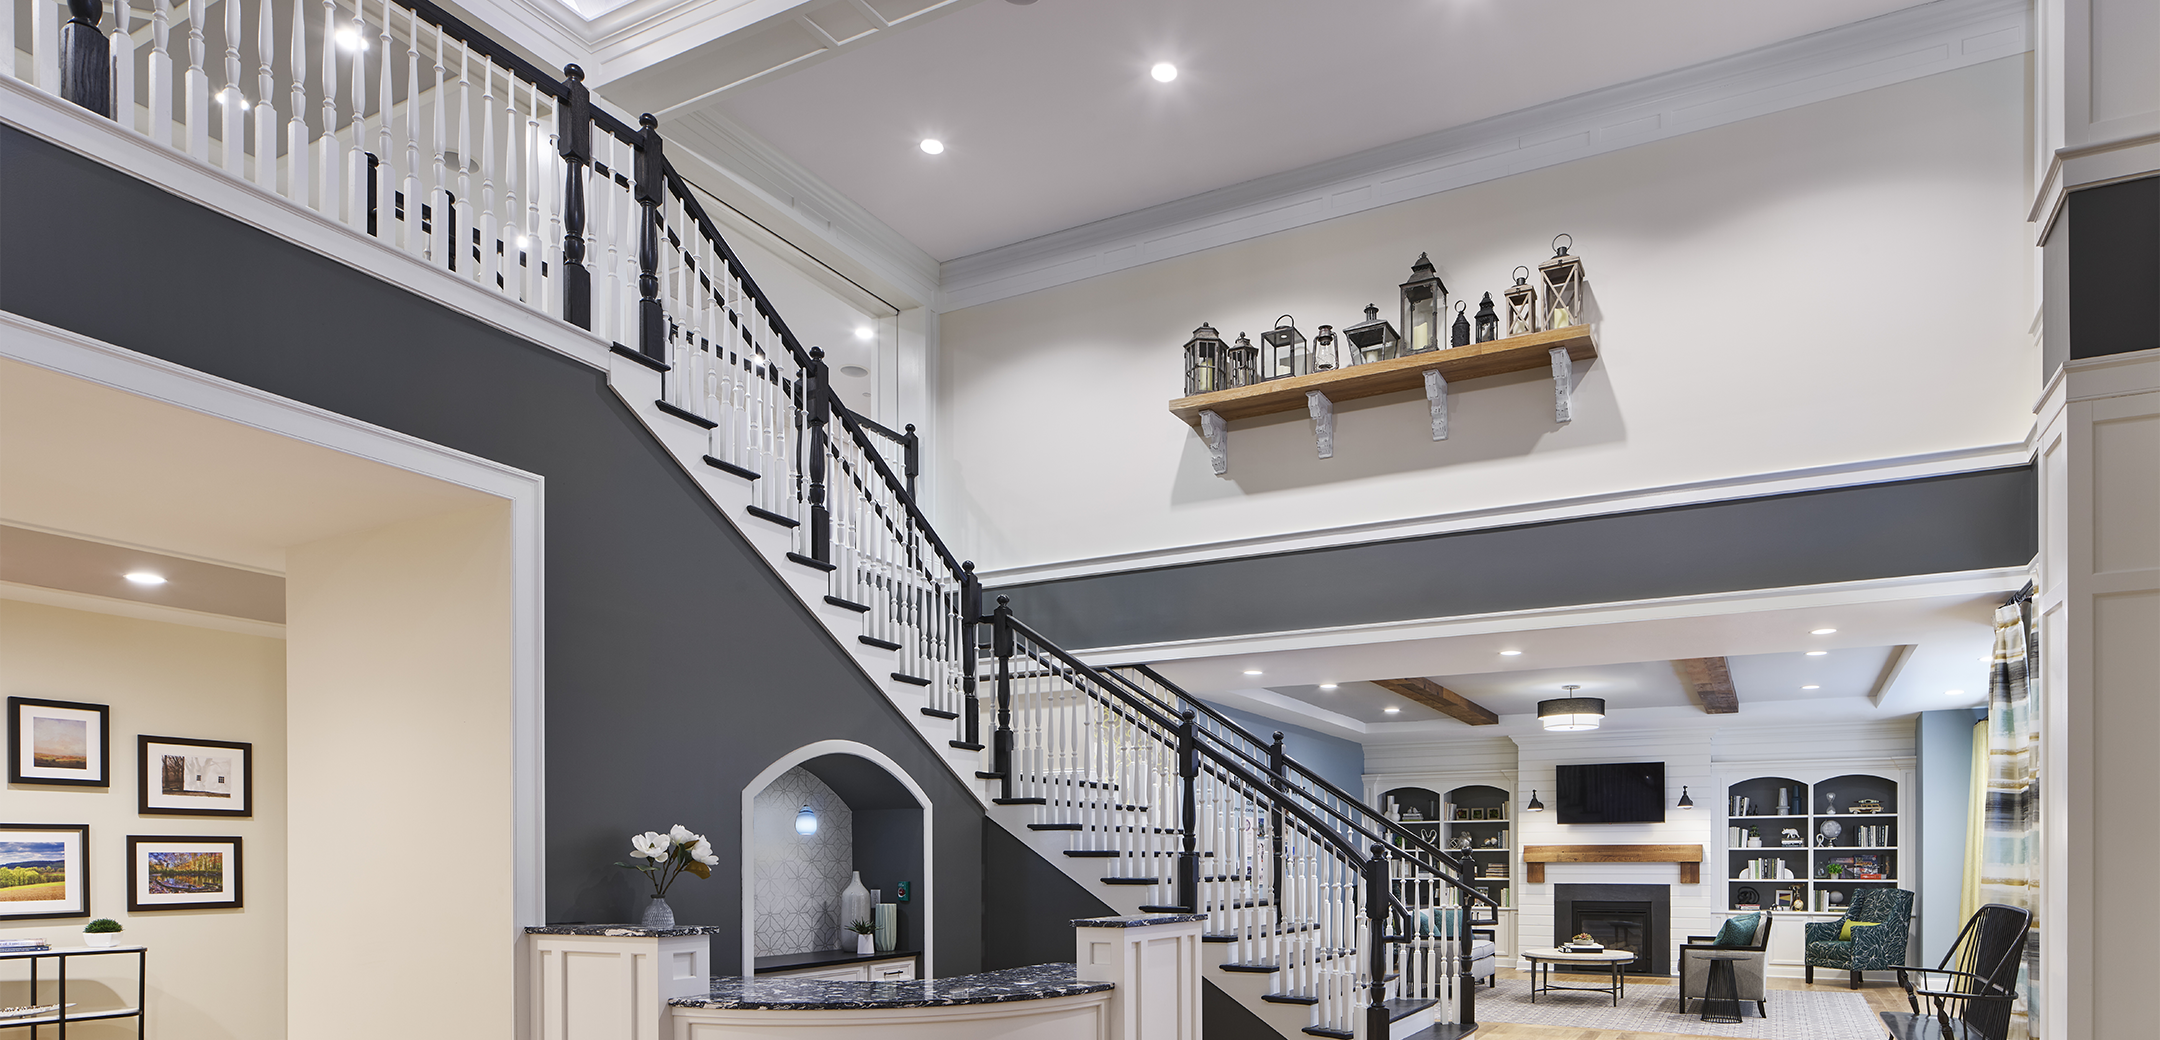 An interior view of the Arbor Terrace Exton staircase leading up to the second floor with white accent panels and grey walls with an open concept living room in the background.